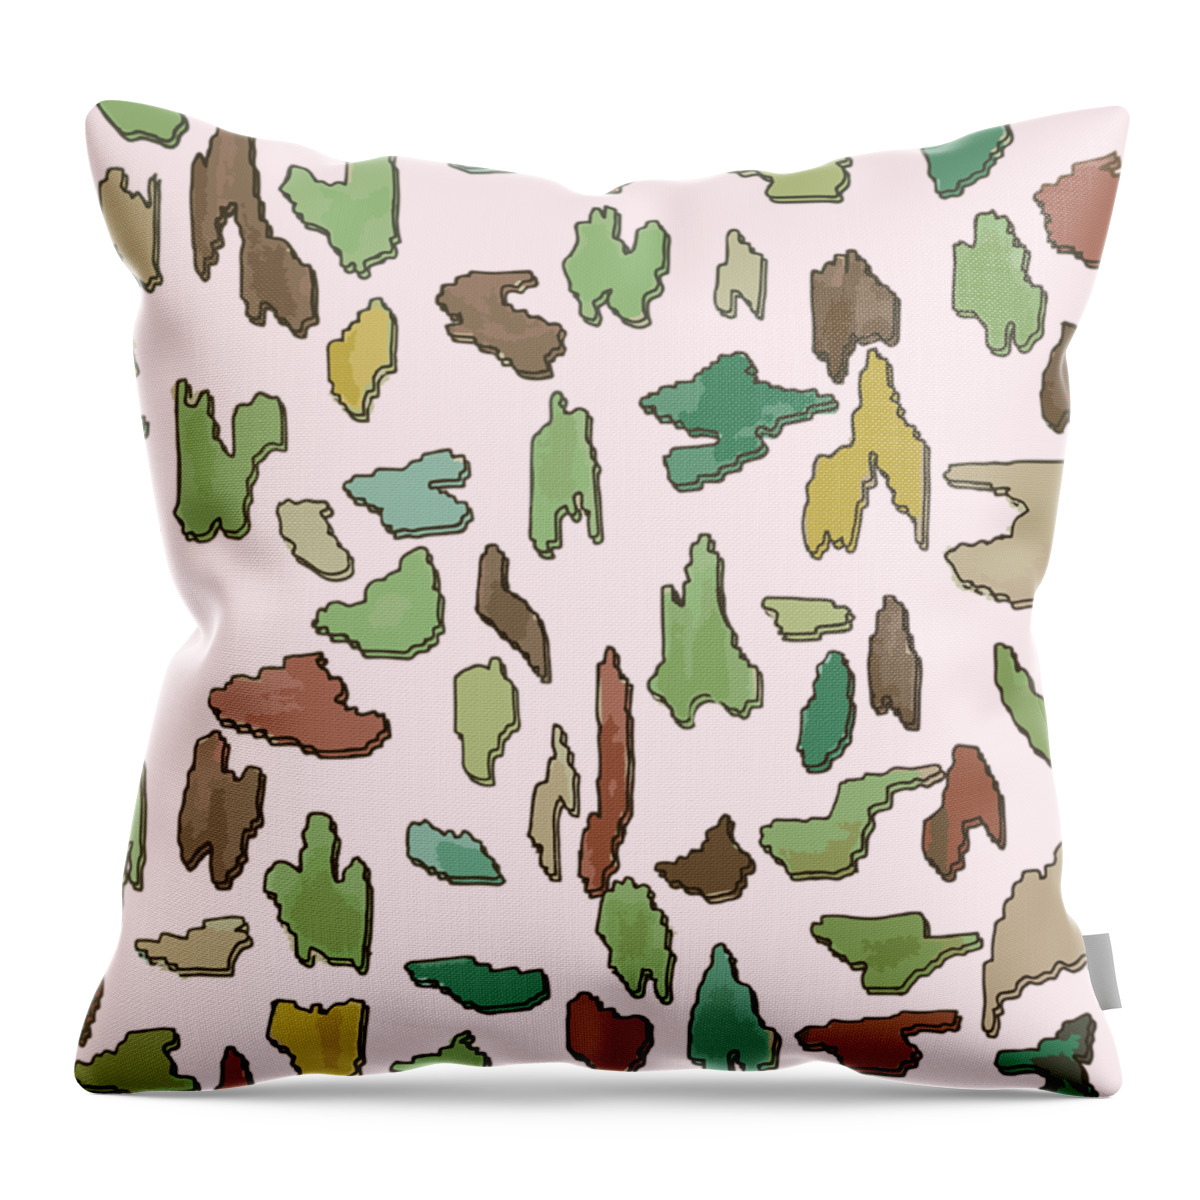 Pattern Throw Pillow featuring the digital art Color Pattern 3d by Cortney Herron